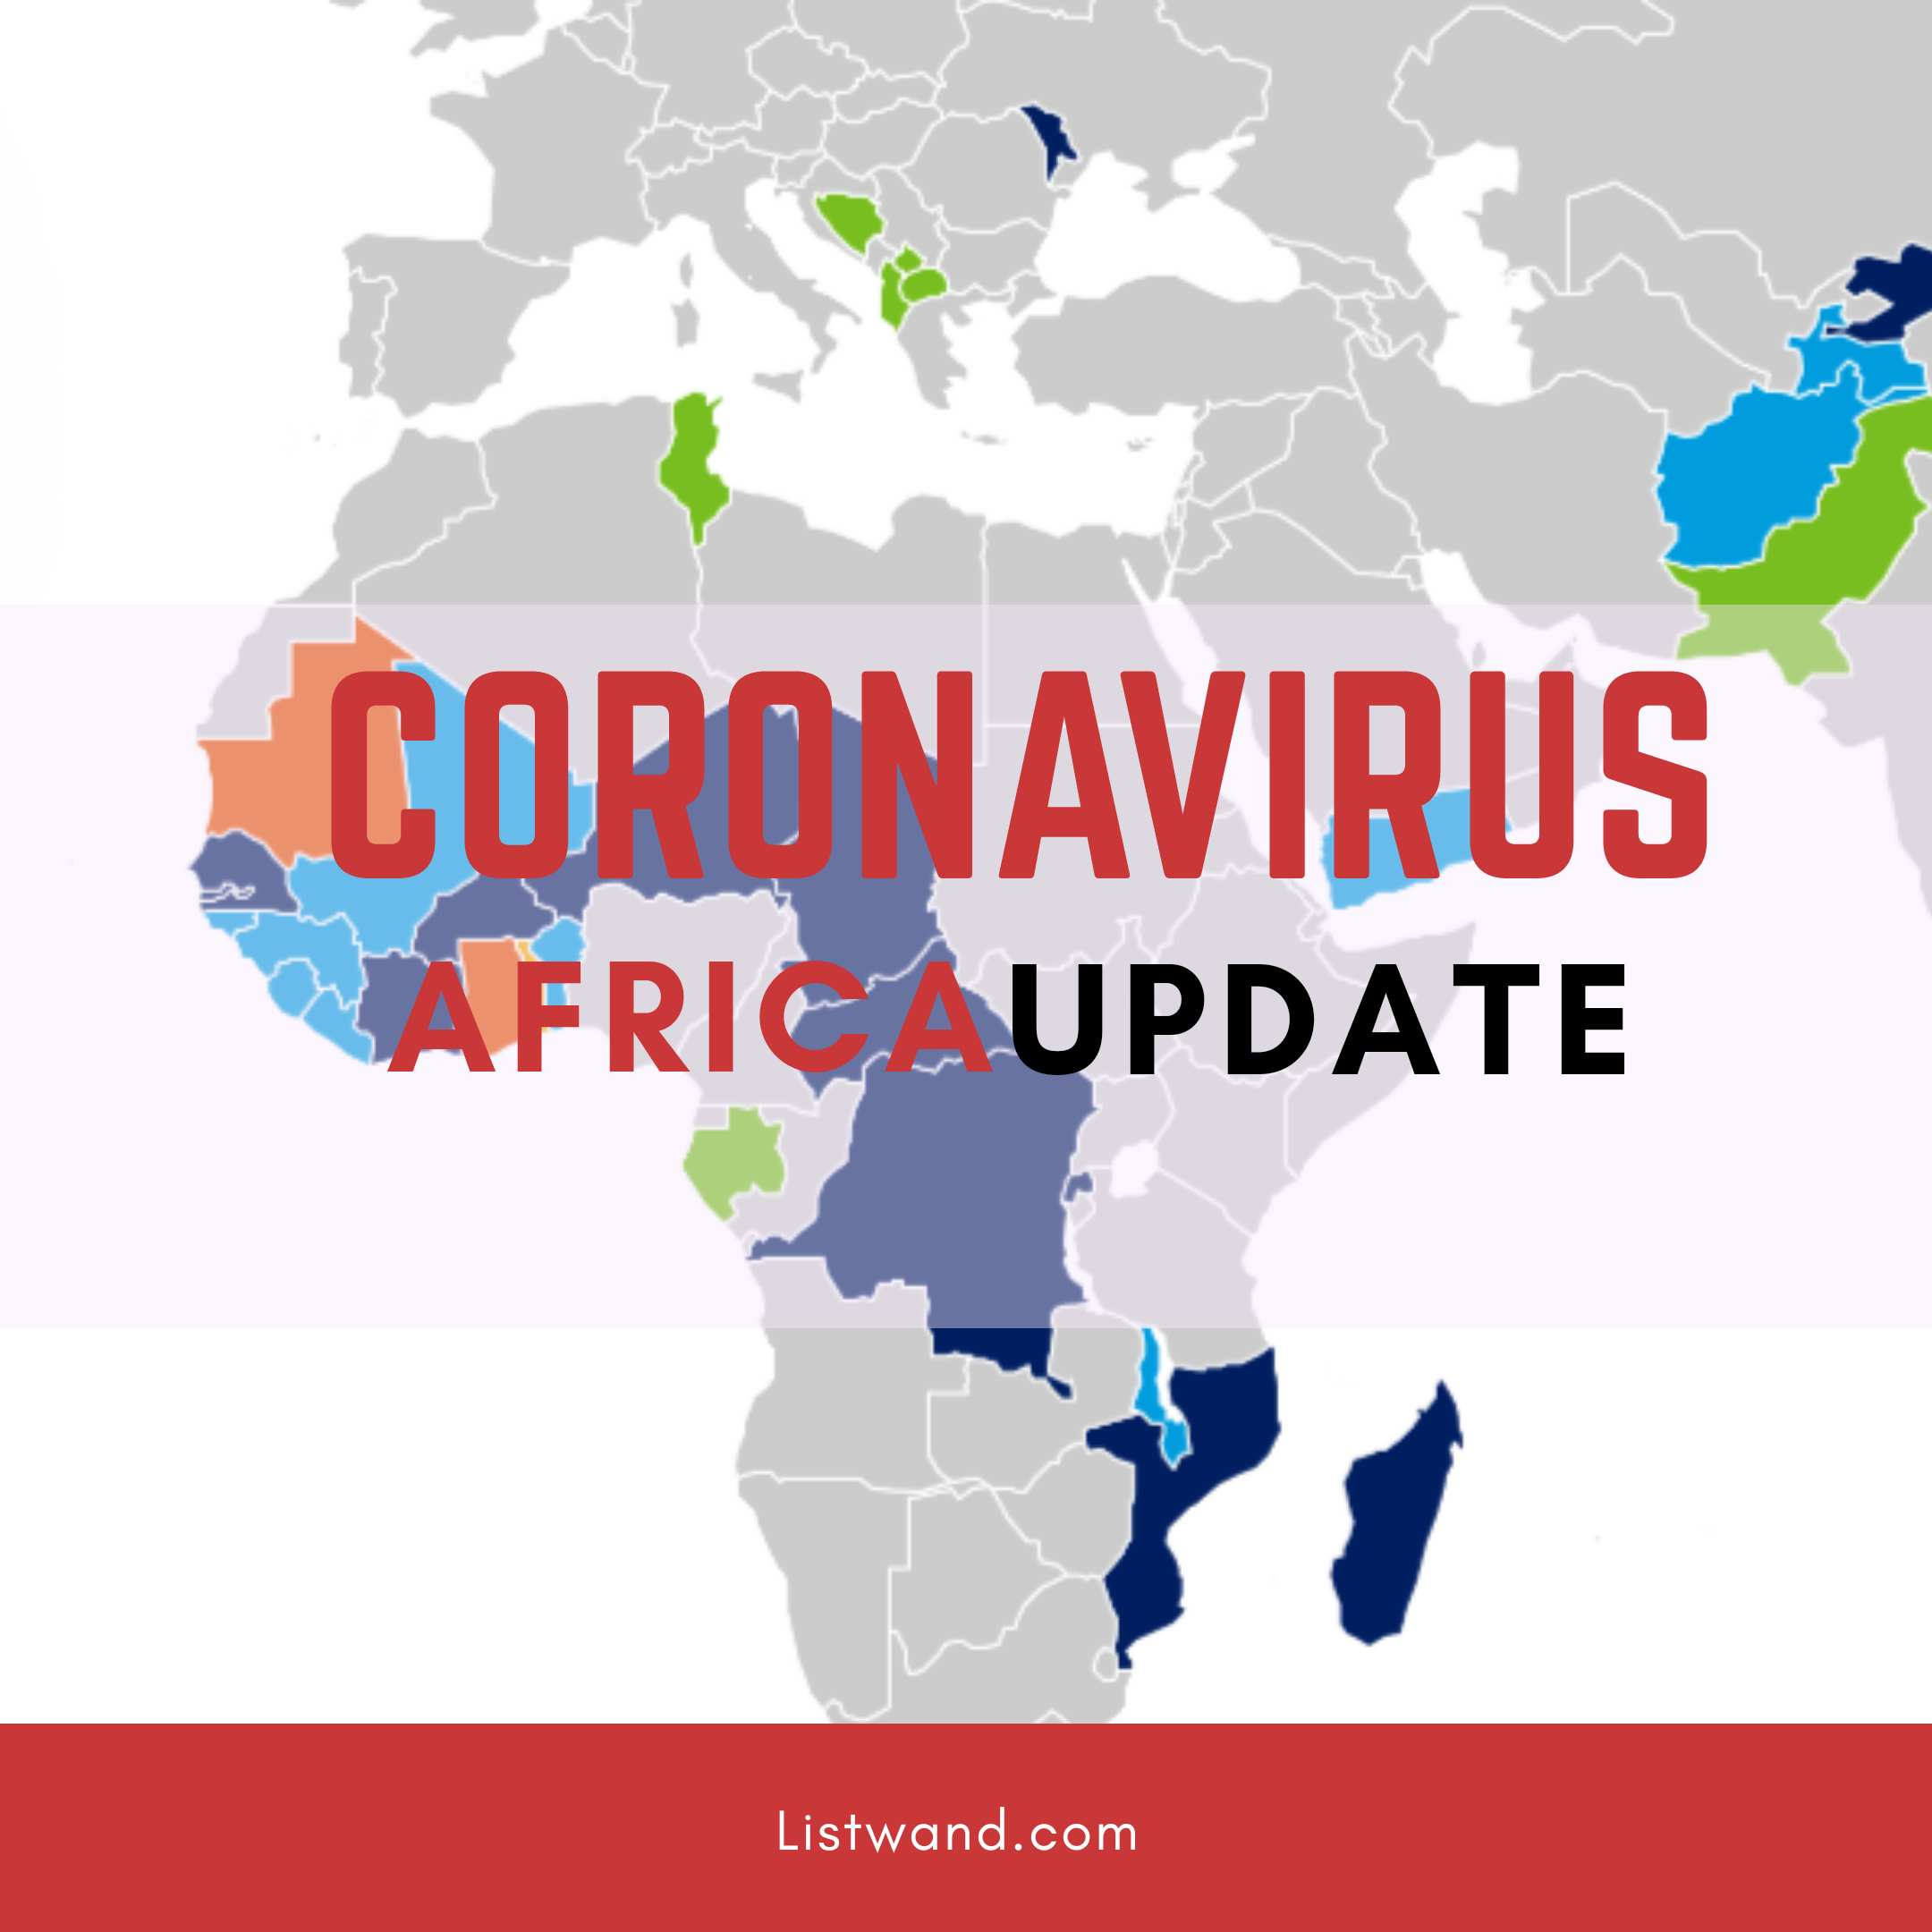 Up to 190,000 People Could Die of COVID-19 in Africa If Not Controlled - WHO